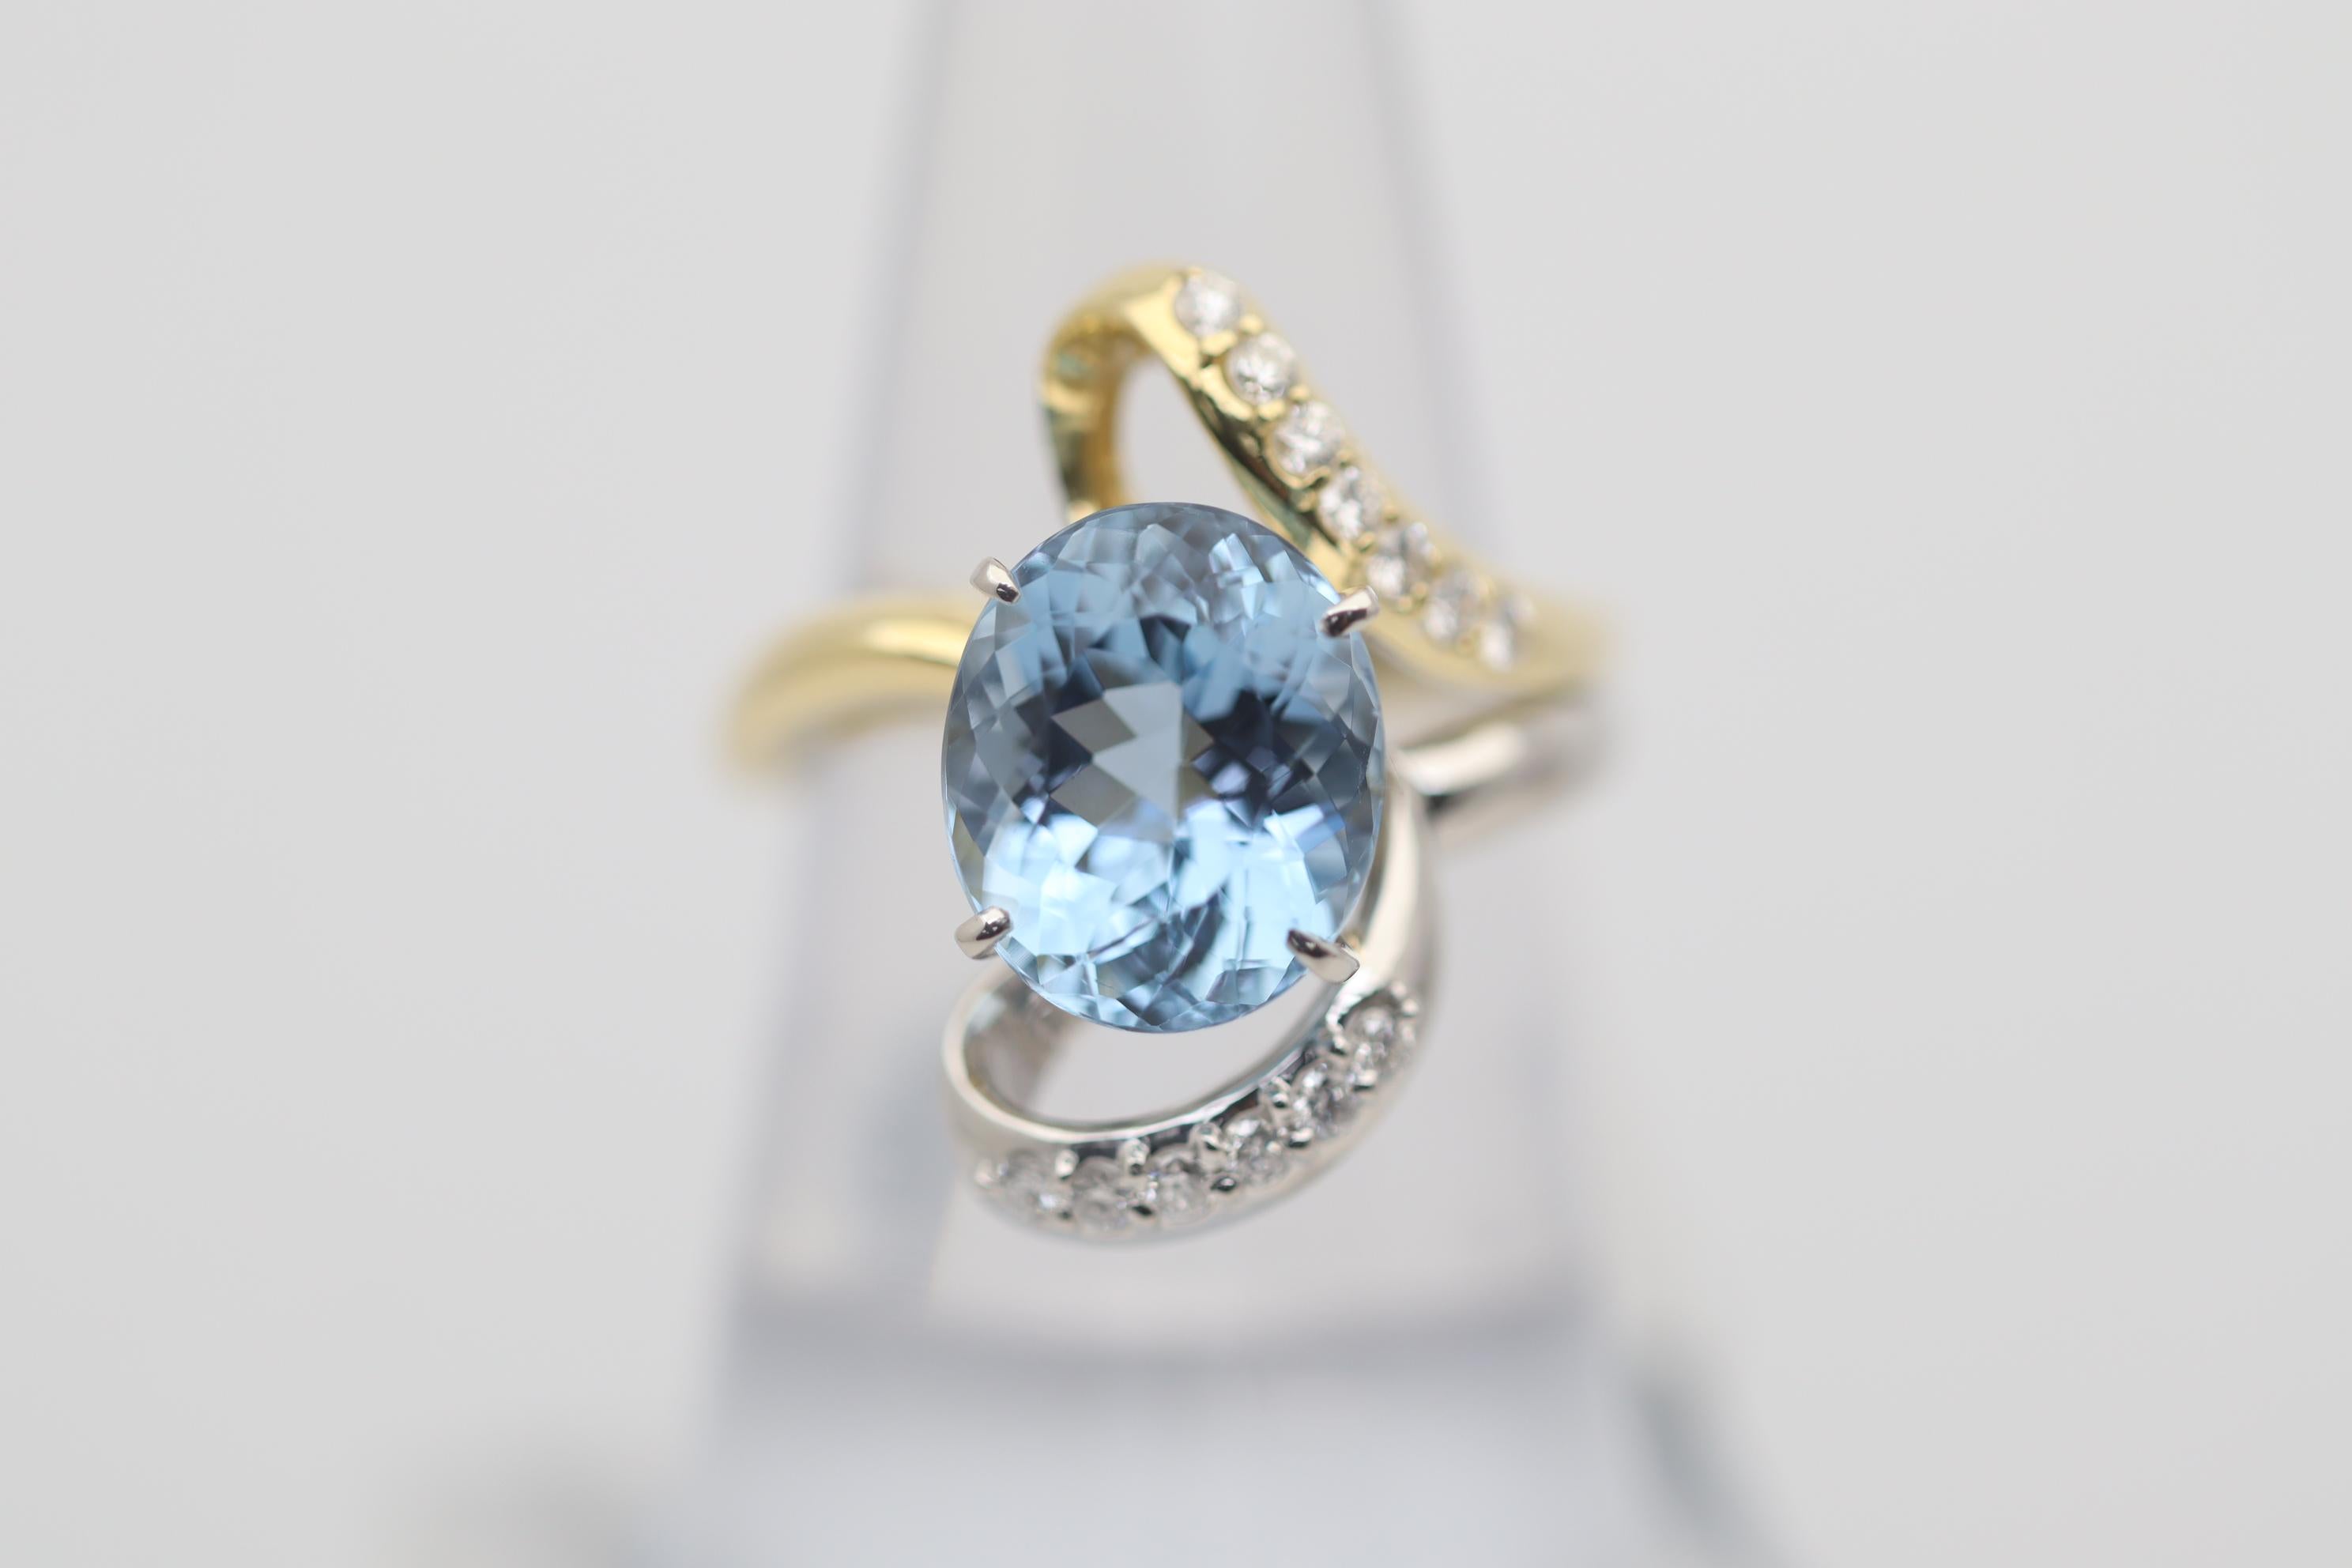 A fun and stylish ring featuring a gem 5.16 carat aquamarine. It has a bright and lively sea-blue color with excellent life and luster. It is complemented by 0.29 carats of round brilliant-cut diamonds set around the ring. Made in both 18k yellow